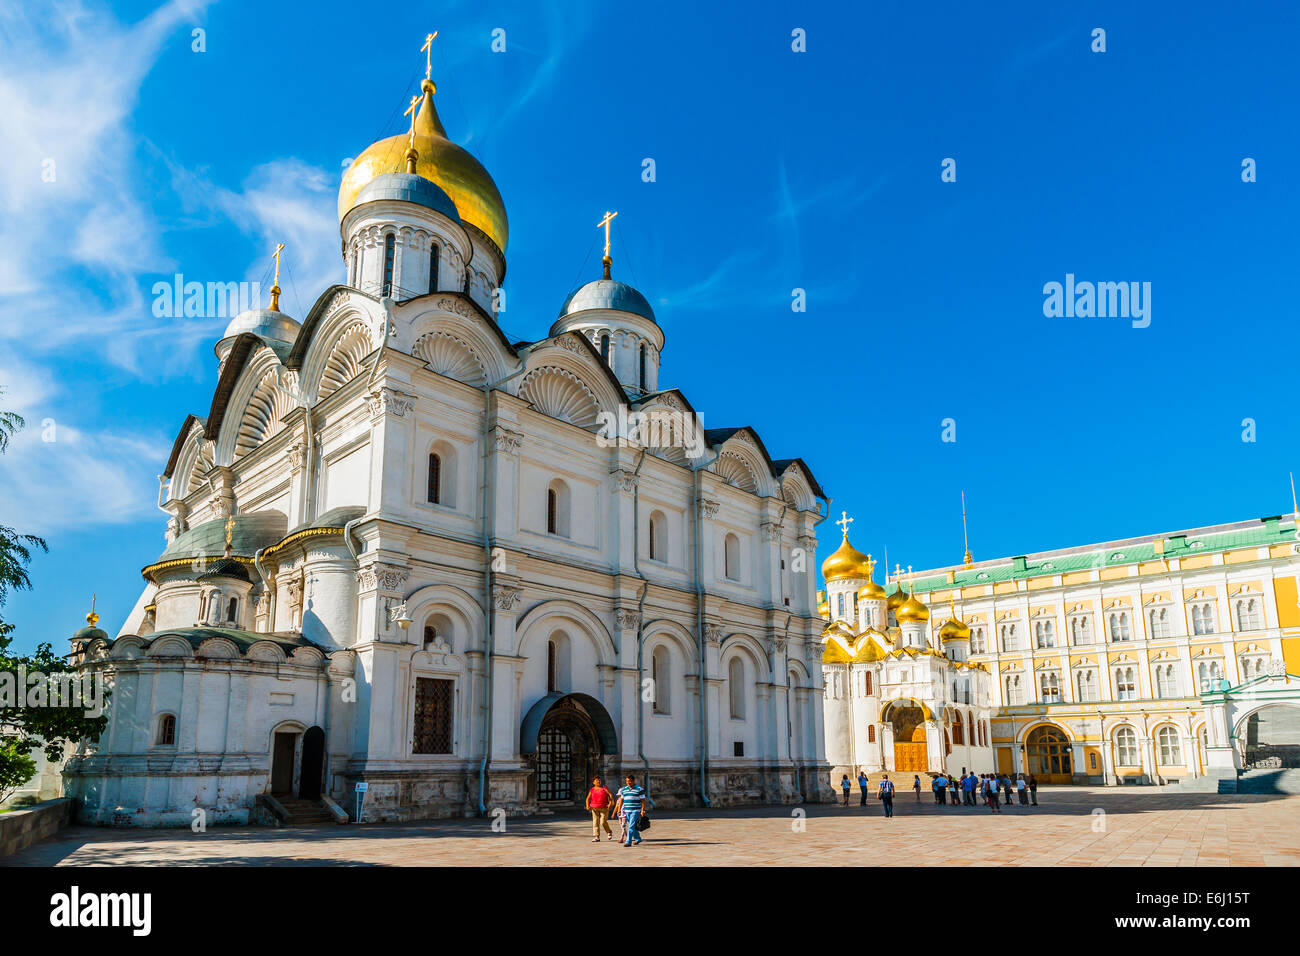 Moscow Kremlin Tour - 27. Cathedral square, Archangel cathedral (left) Stock Photo